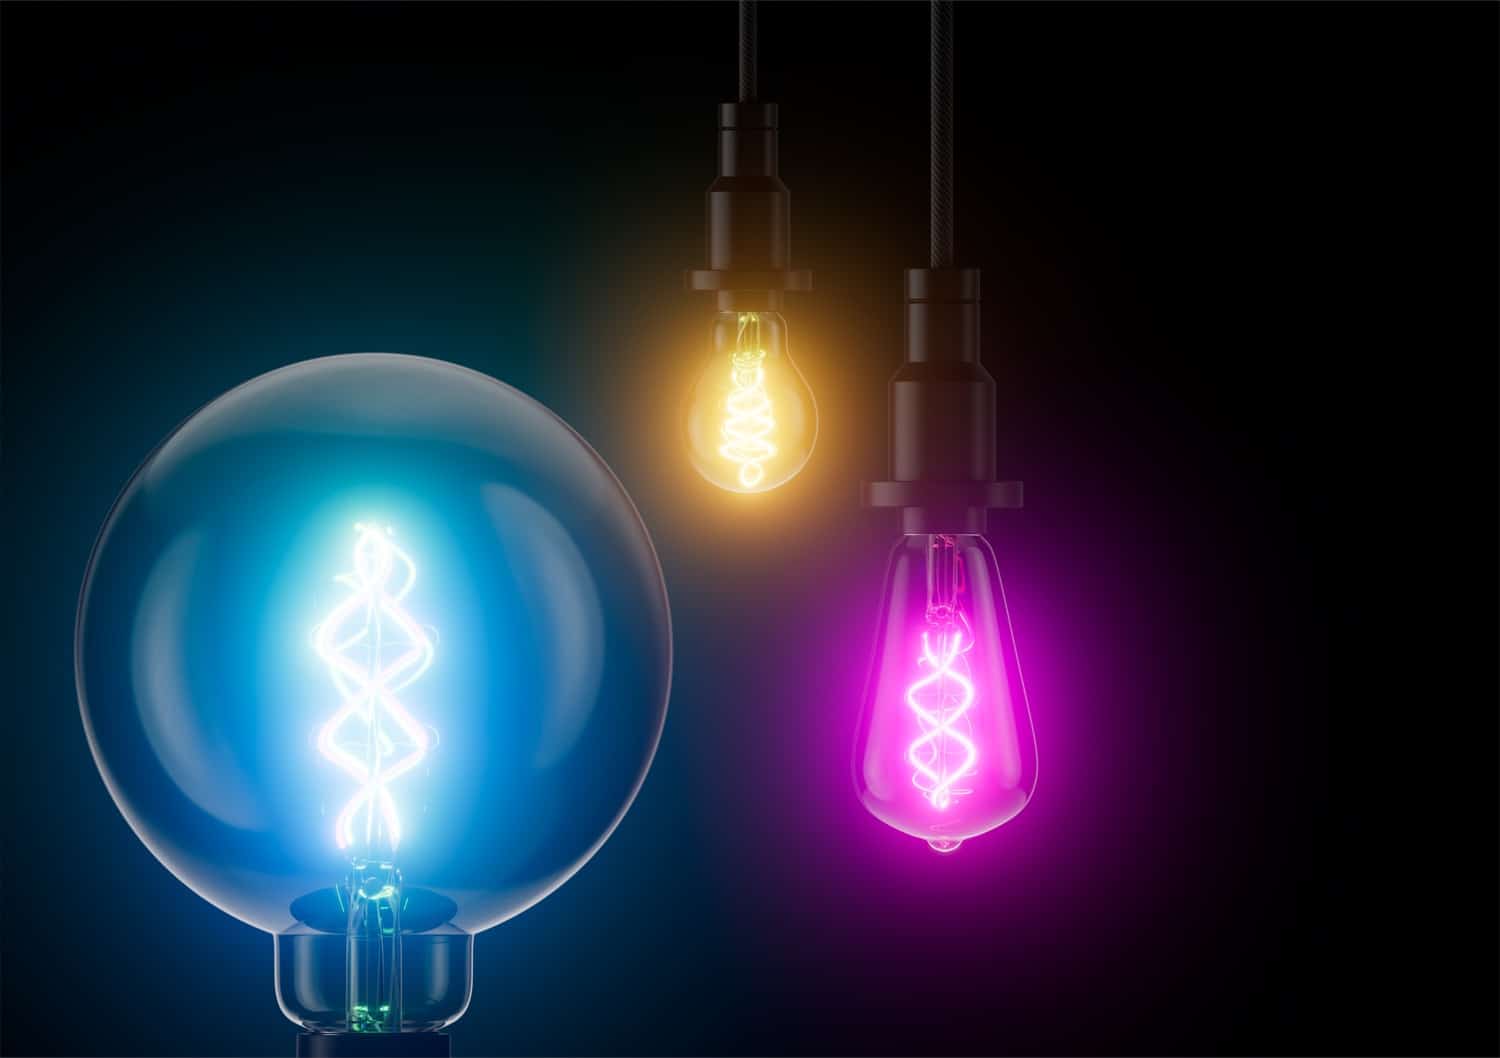 New Colored LED Filament Smart Bulbs from LEDVANCE